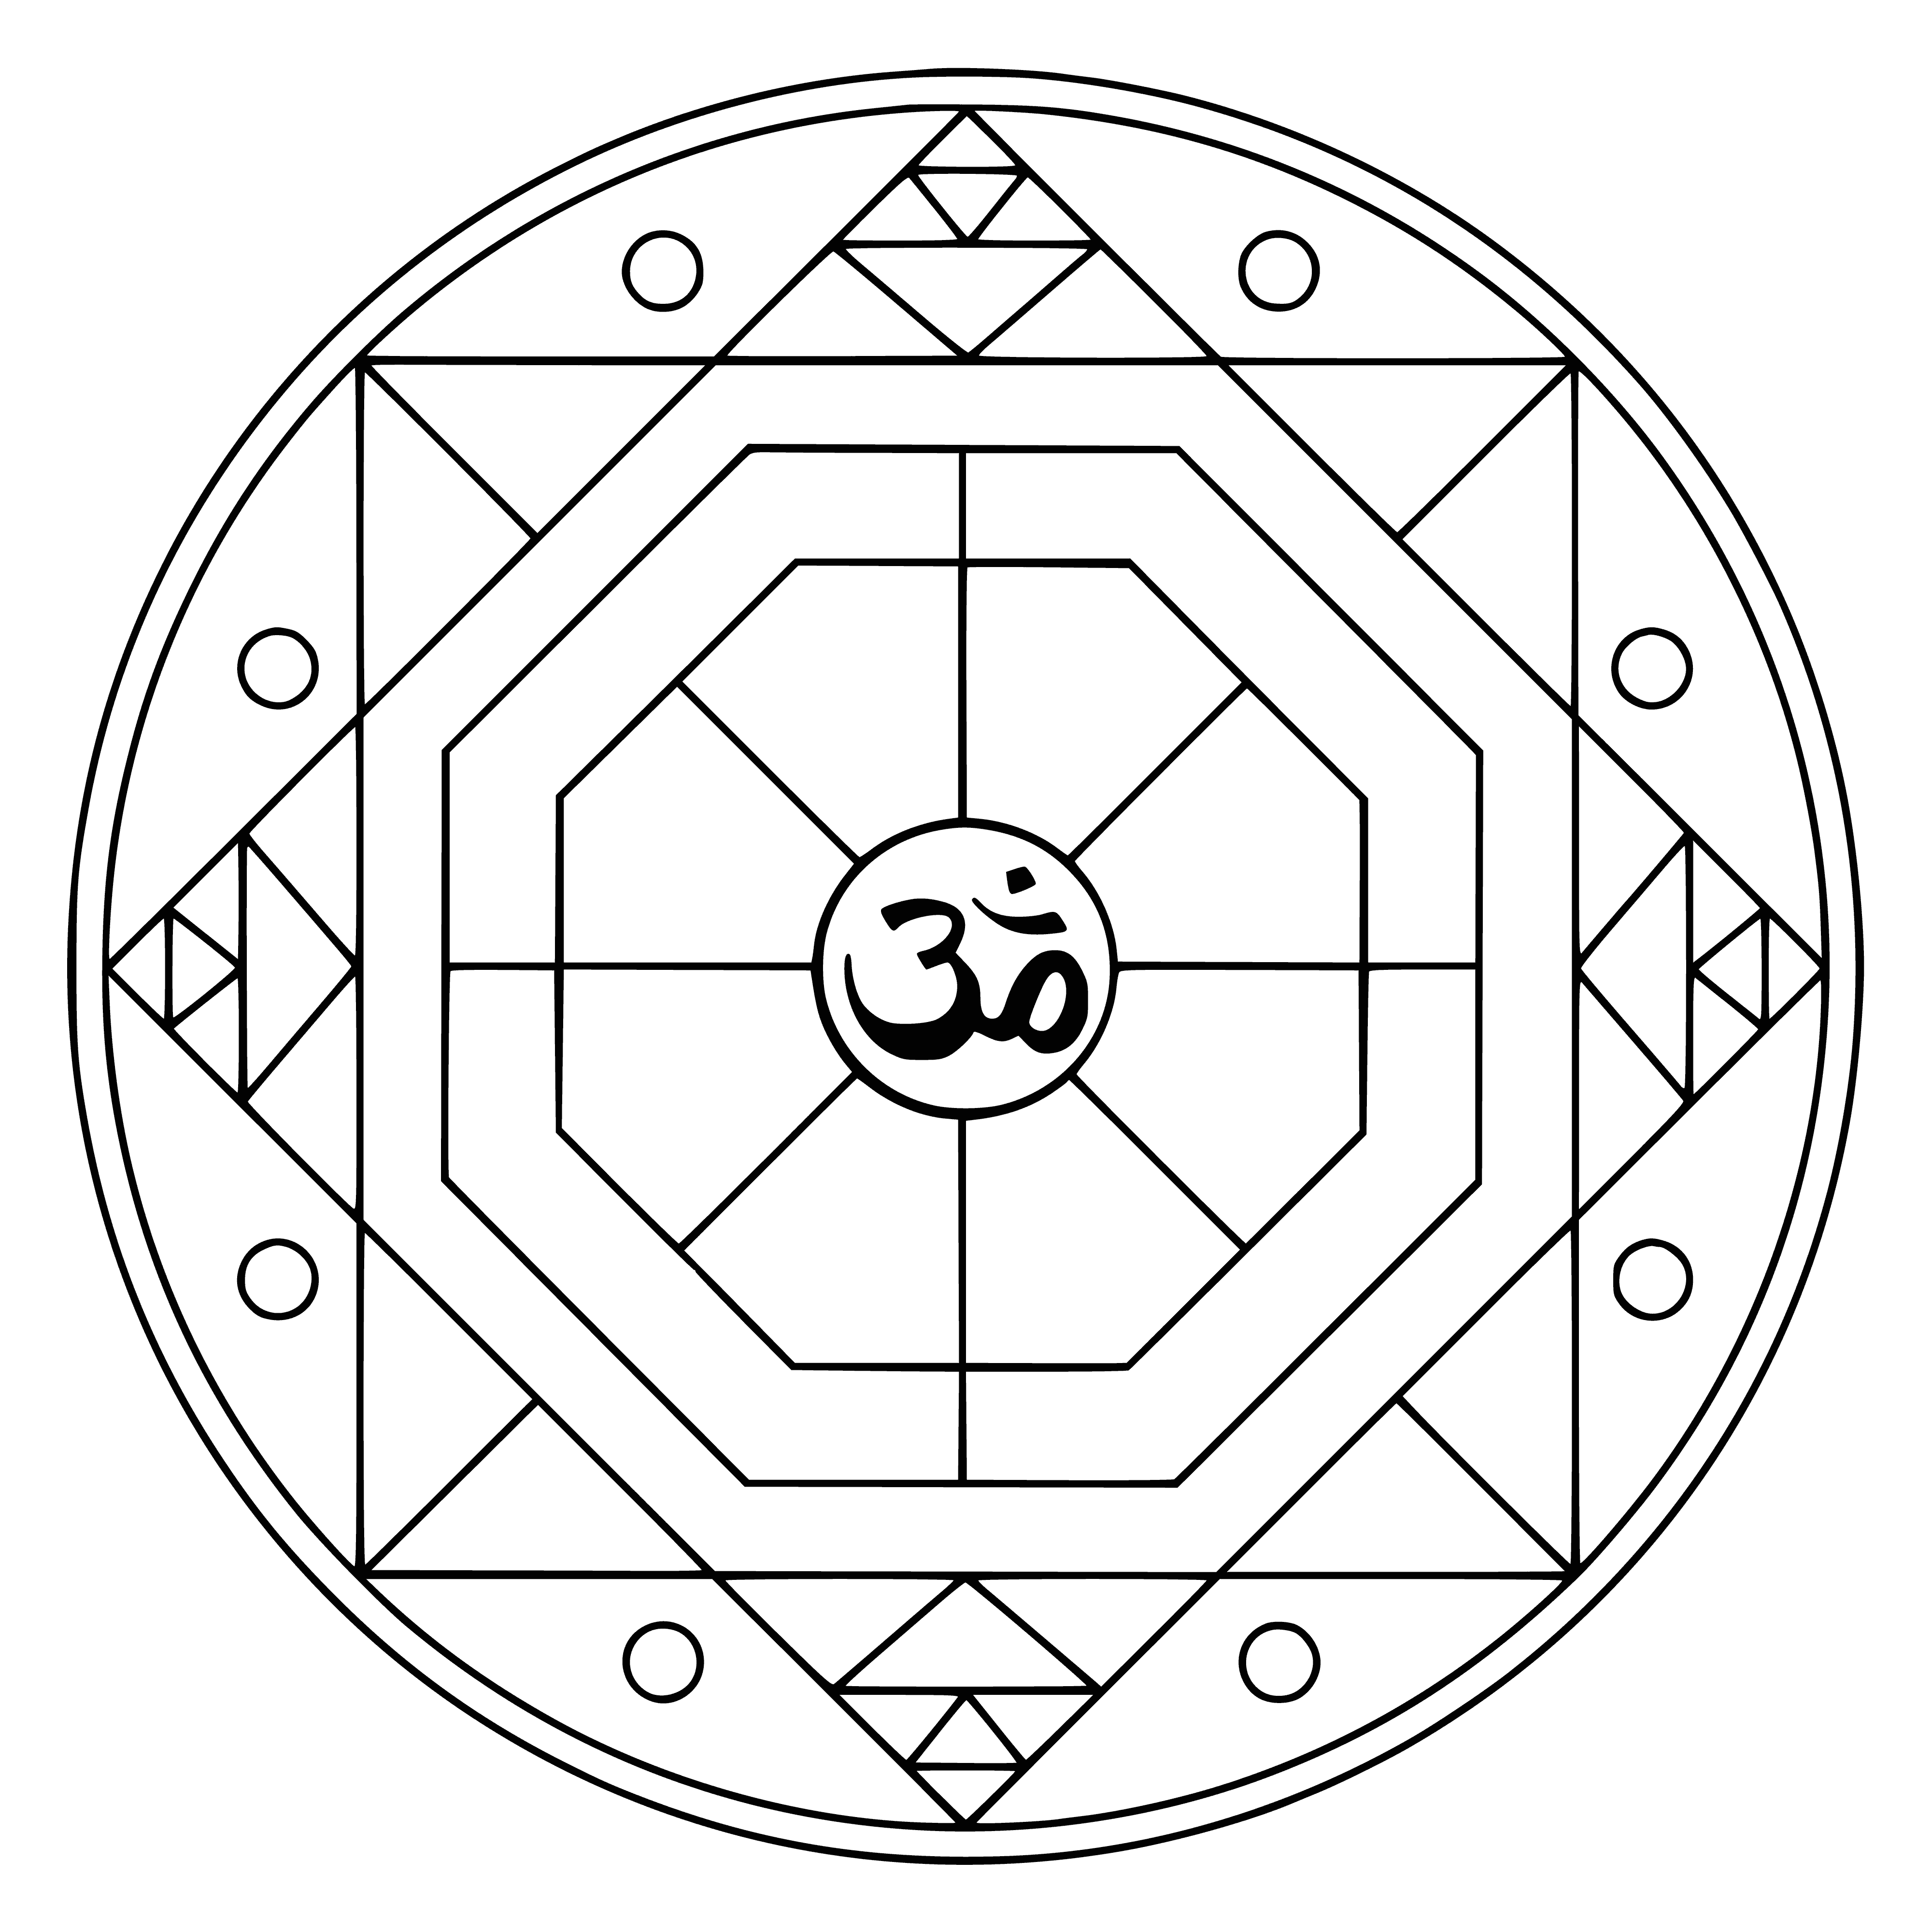 coloring page: Geometric mandala with Om symbol & vivid colors radiating outwards from center: blues, purple, pink.